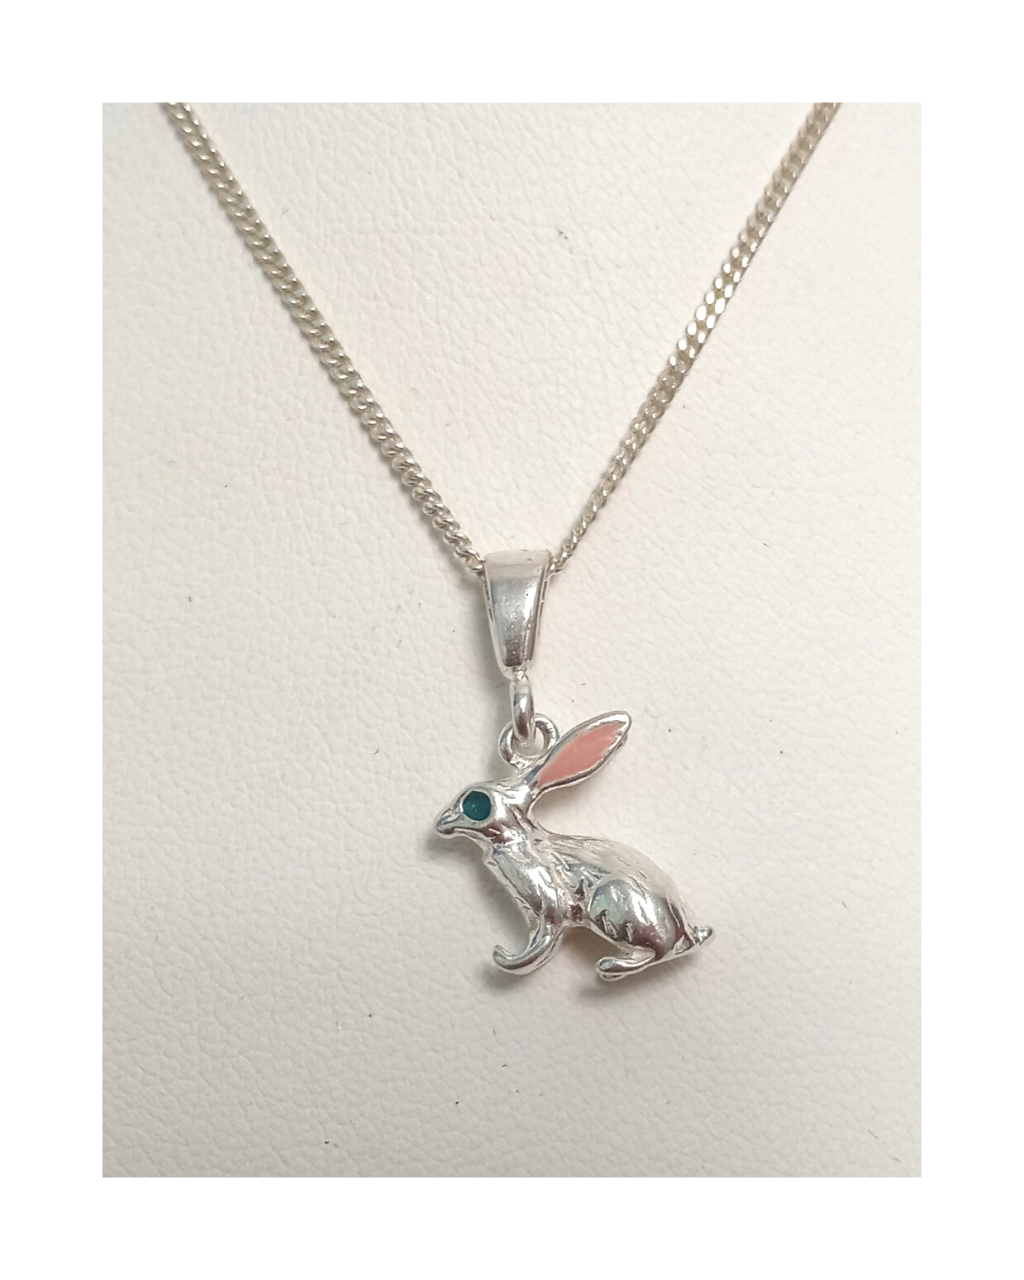 Exclusive Sterling 3-D 2-sided Hand-enameled Easter Bunny with Blue Eyes and Cute Pink Ears Removable Pendant 7/8"L X 7/16"W on 16" Curb Chain ONE ONLY